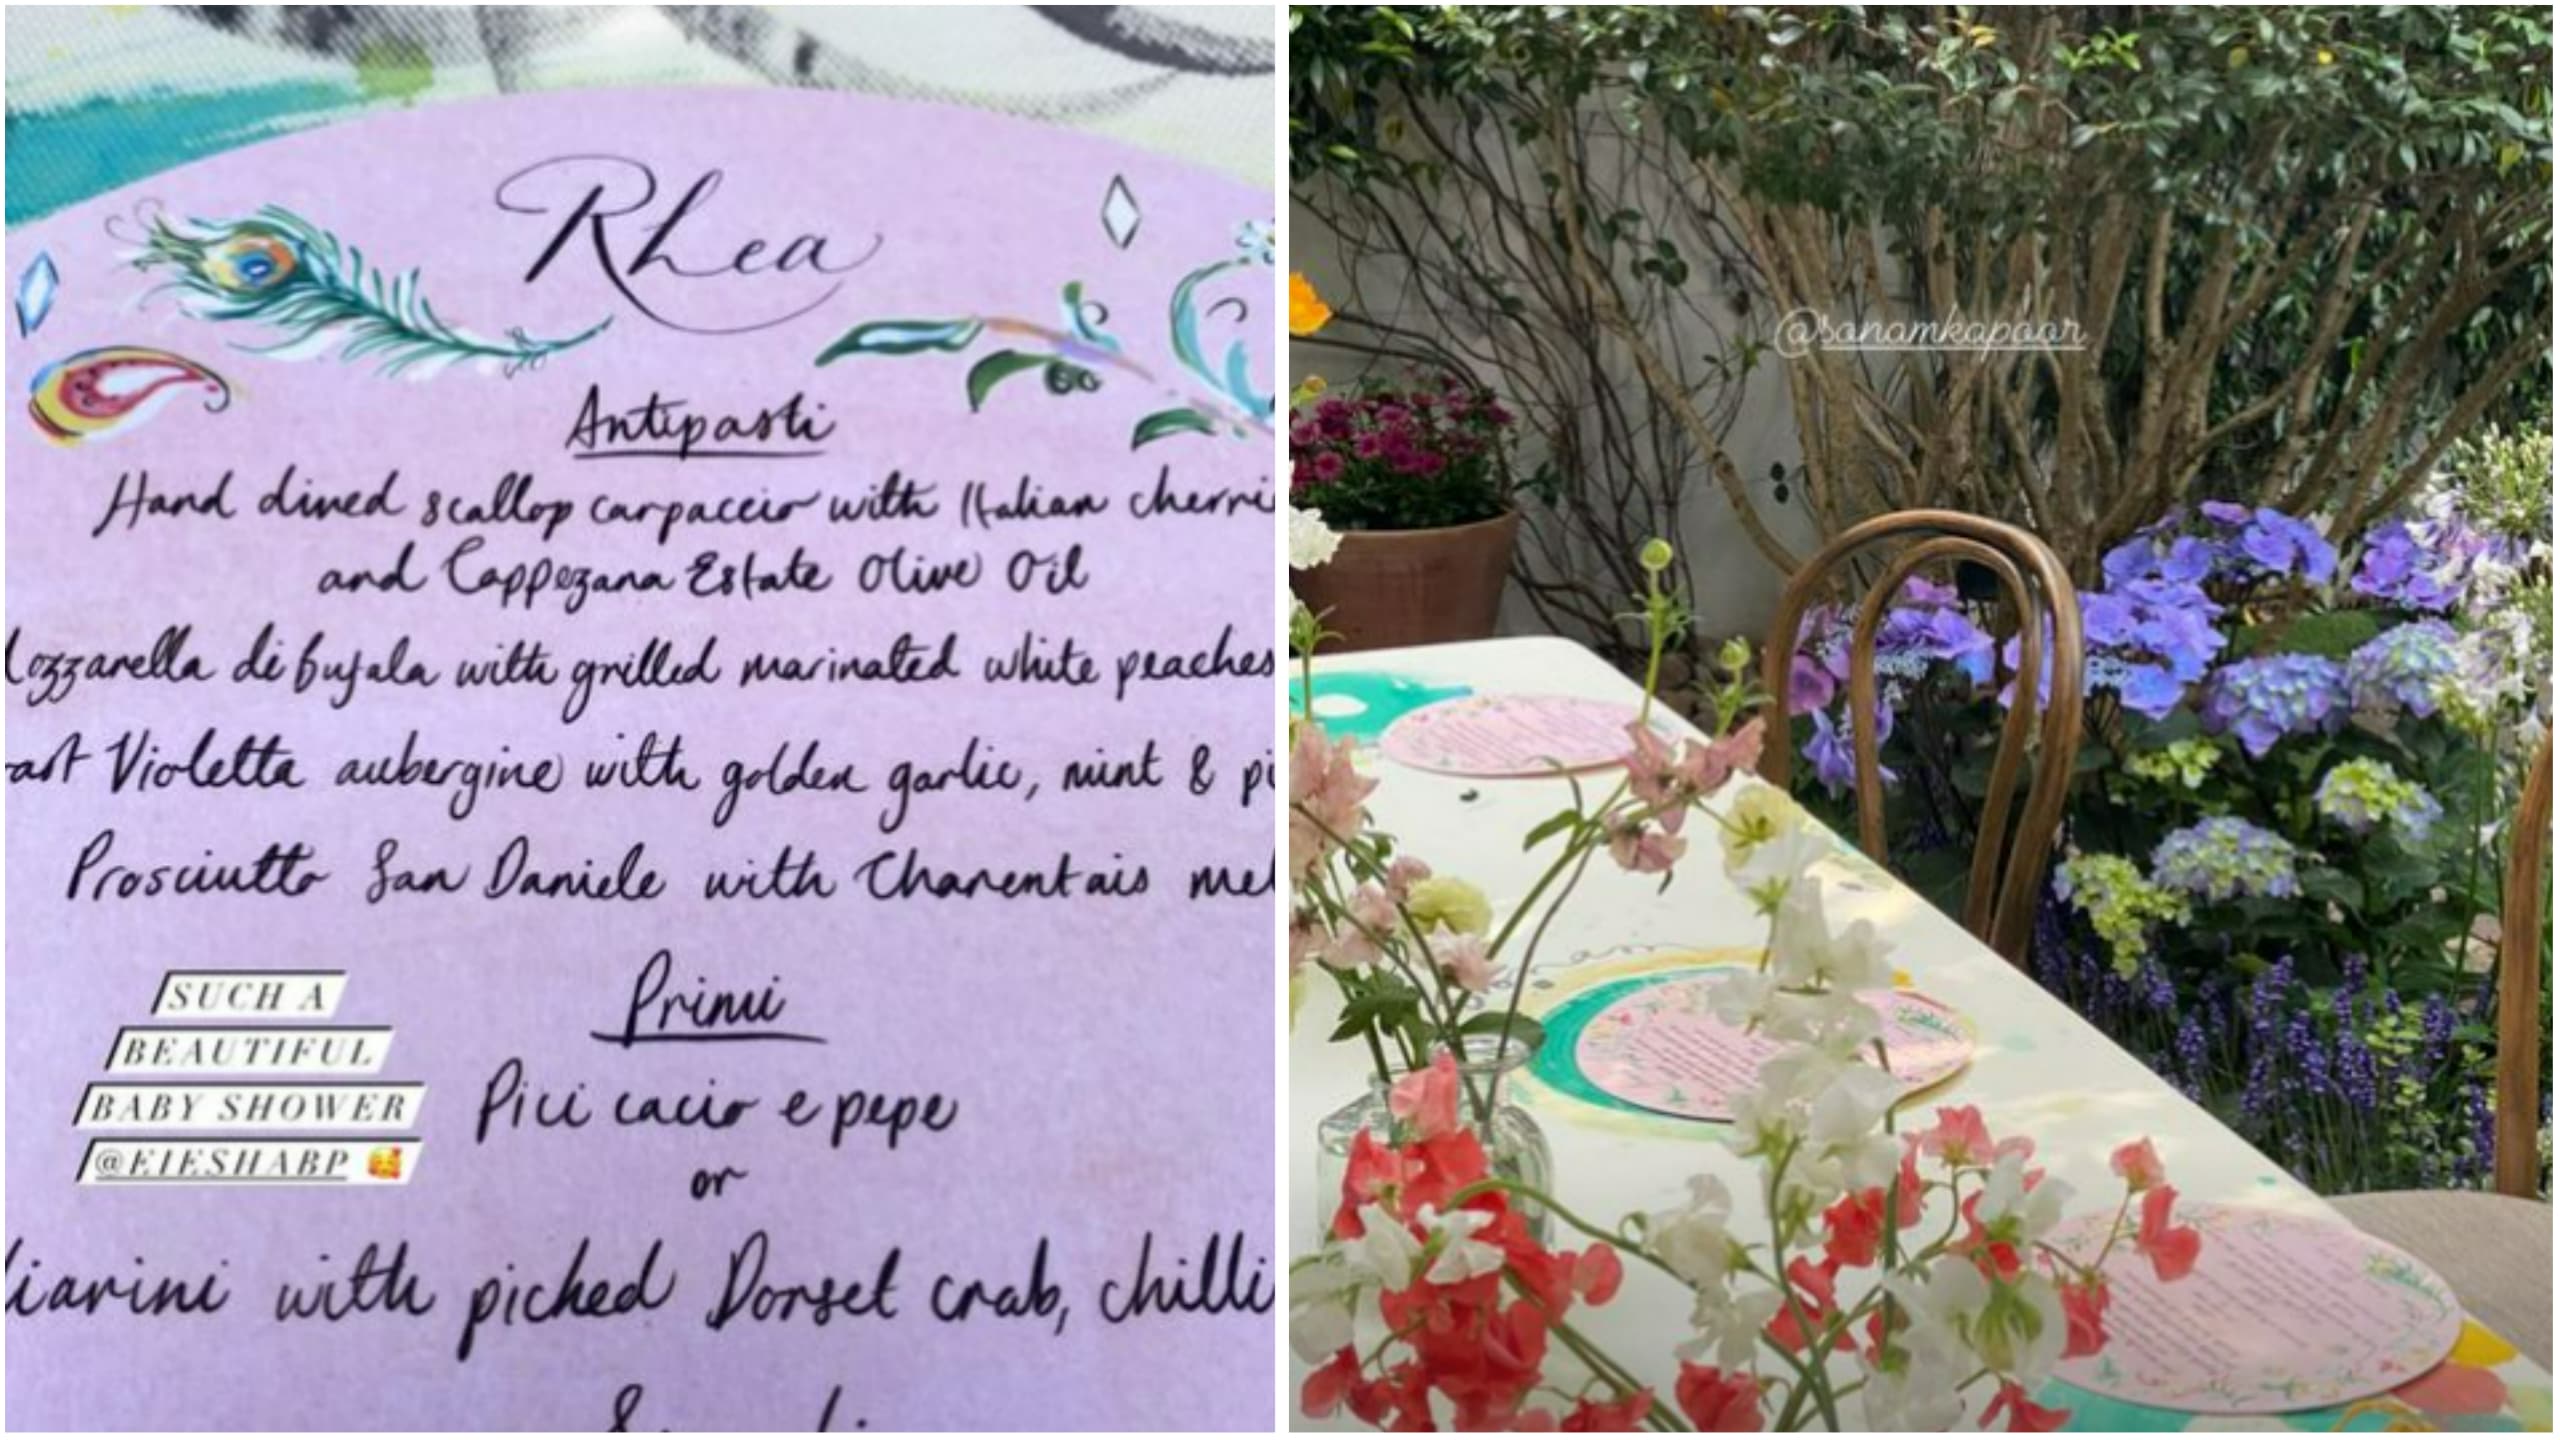 Rhea Kapoor shares pictures from Sonam Kapoor's baby shower.